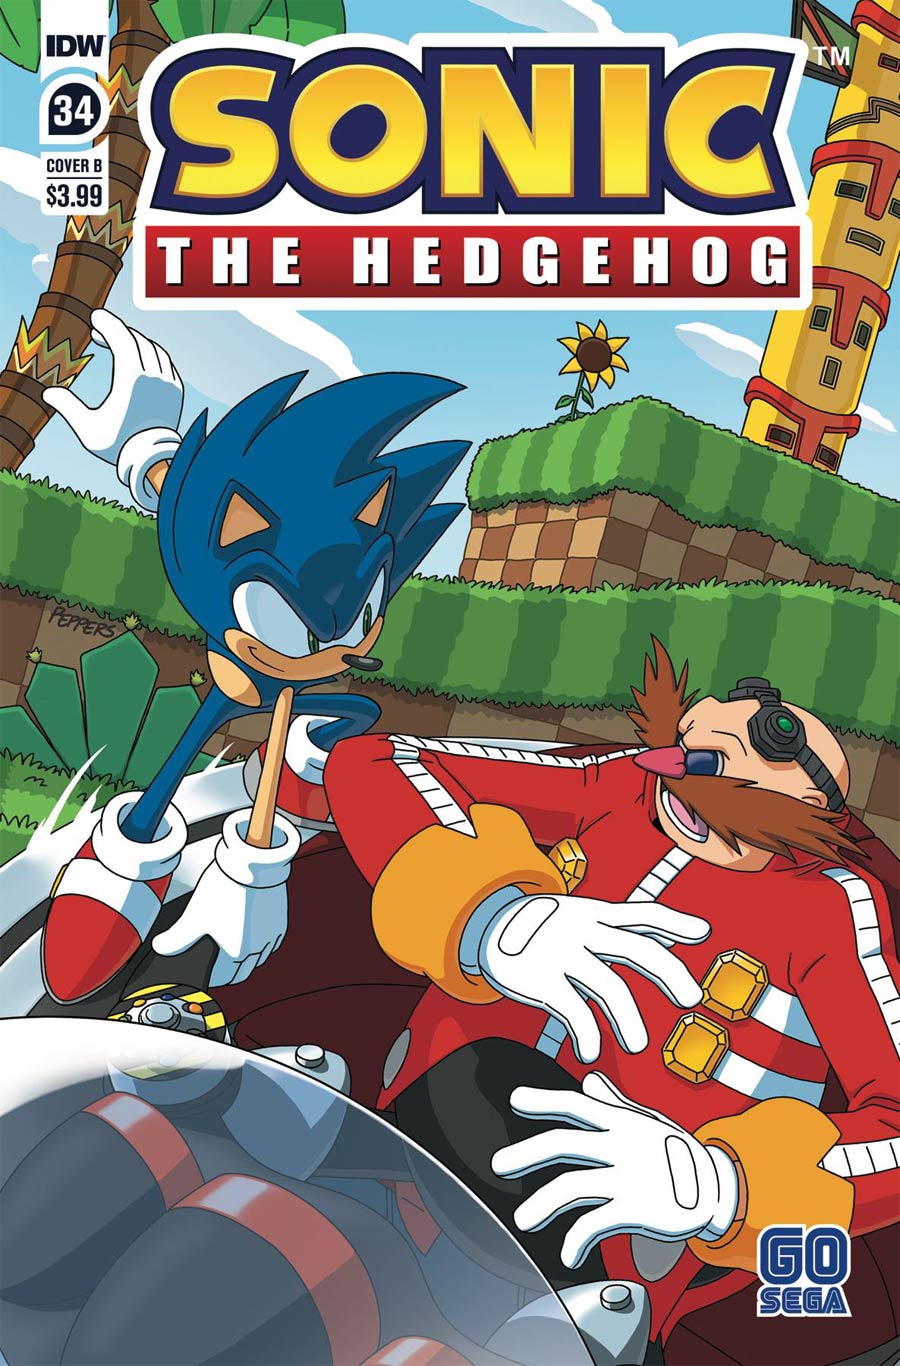 Sonic The Hedgehog Vol 3 #34 Cover B Variant Jamal Peppers Cover